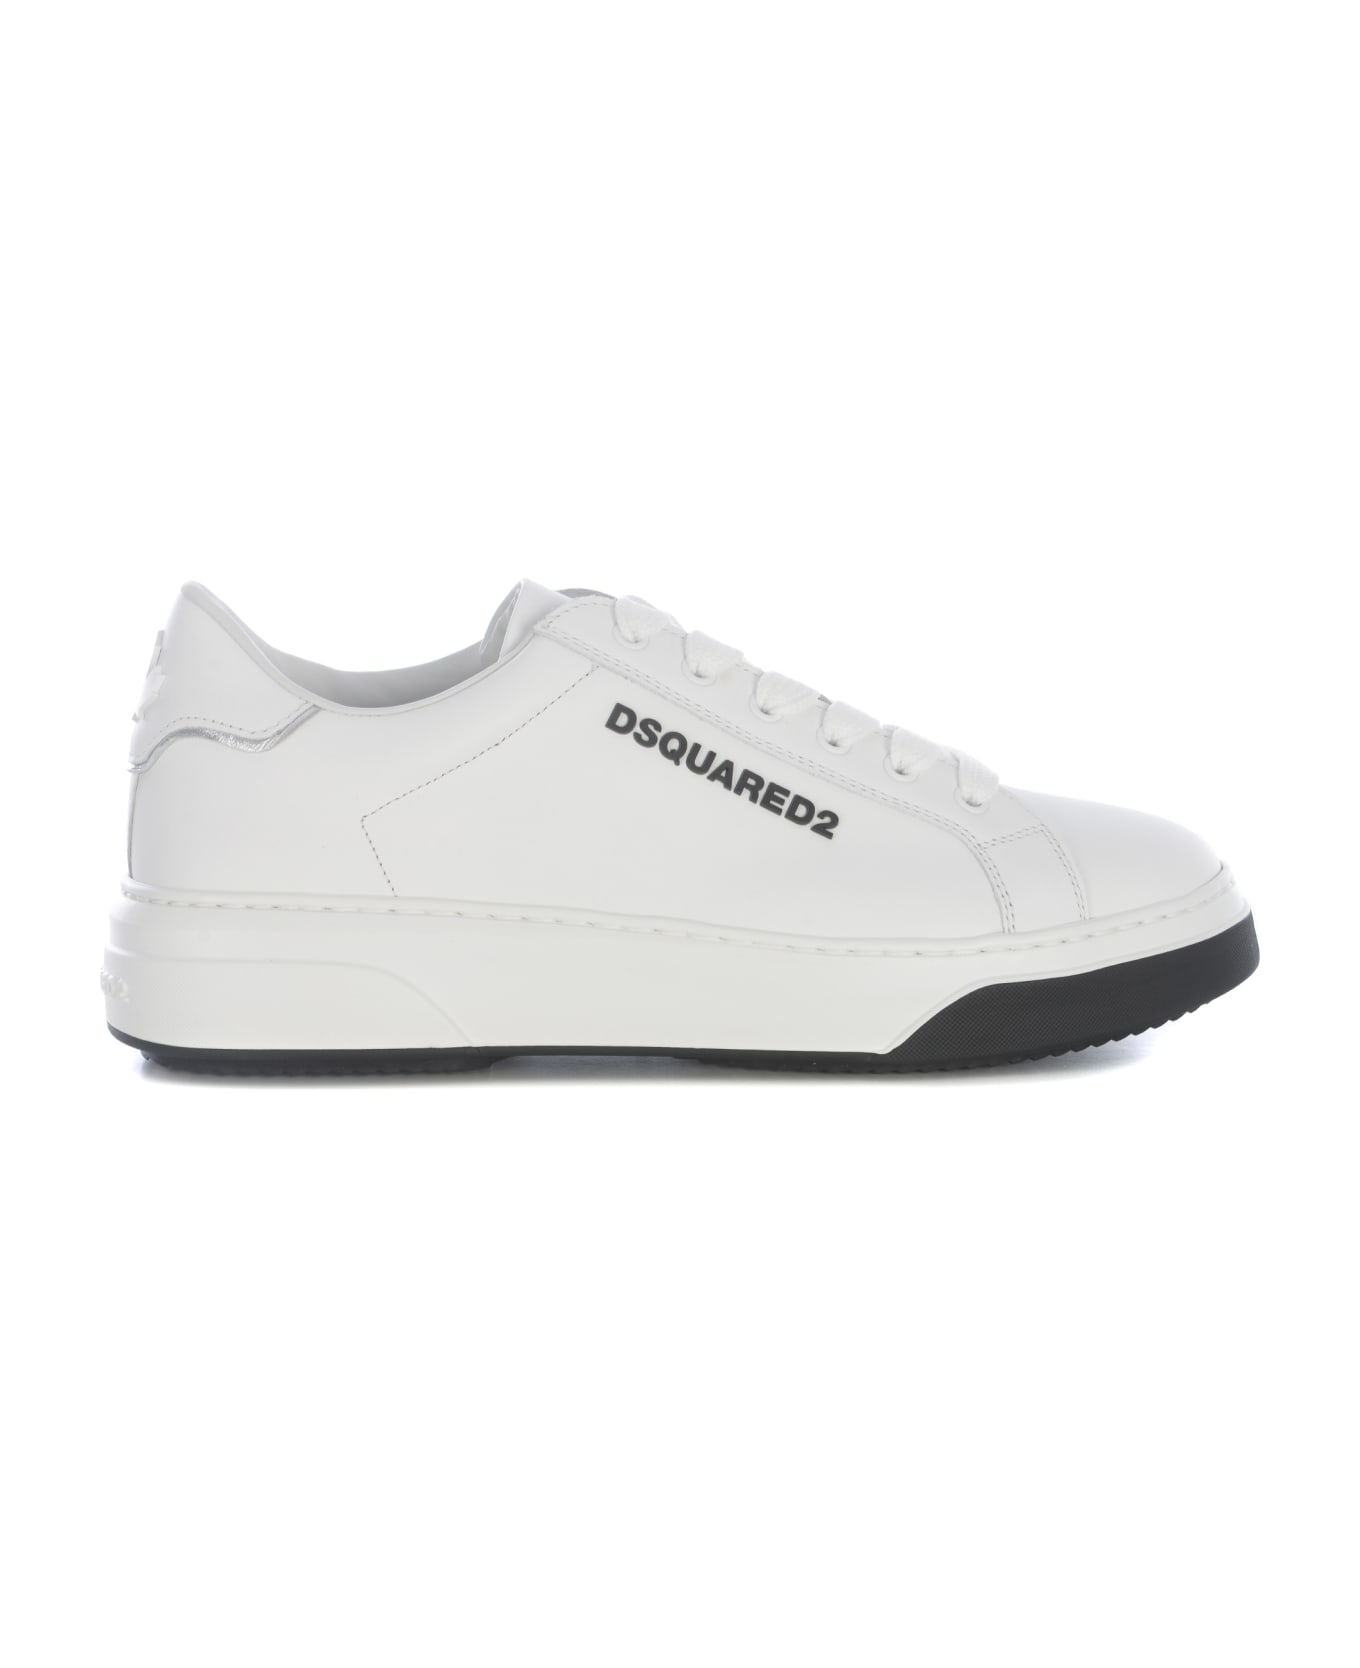 Dsquared2 Sneakers "1964" - Bianco